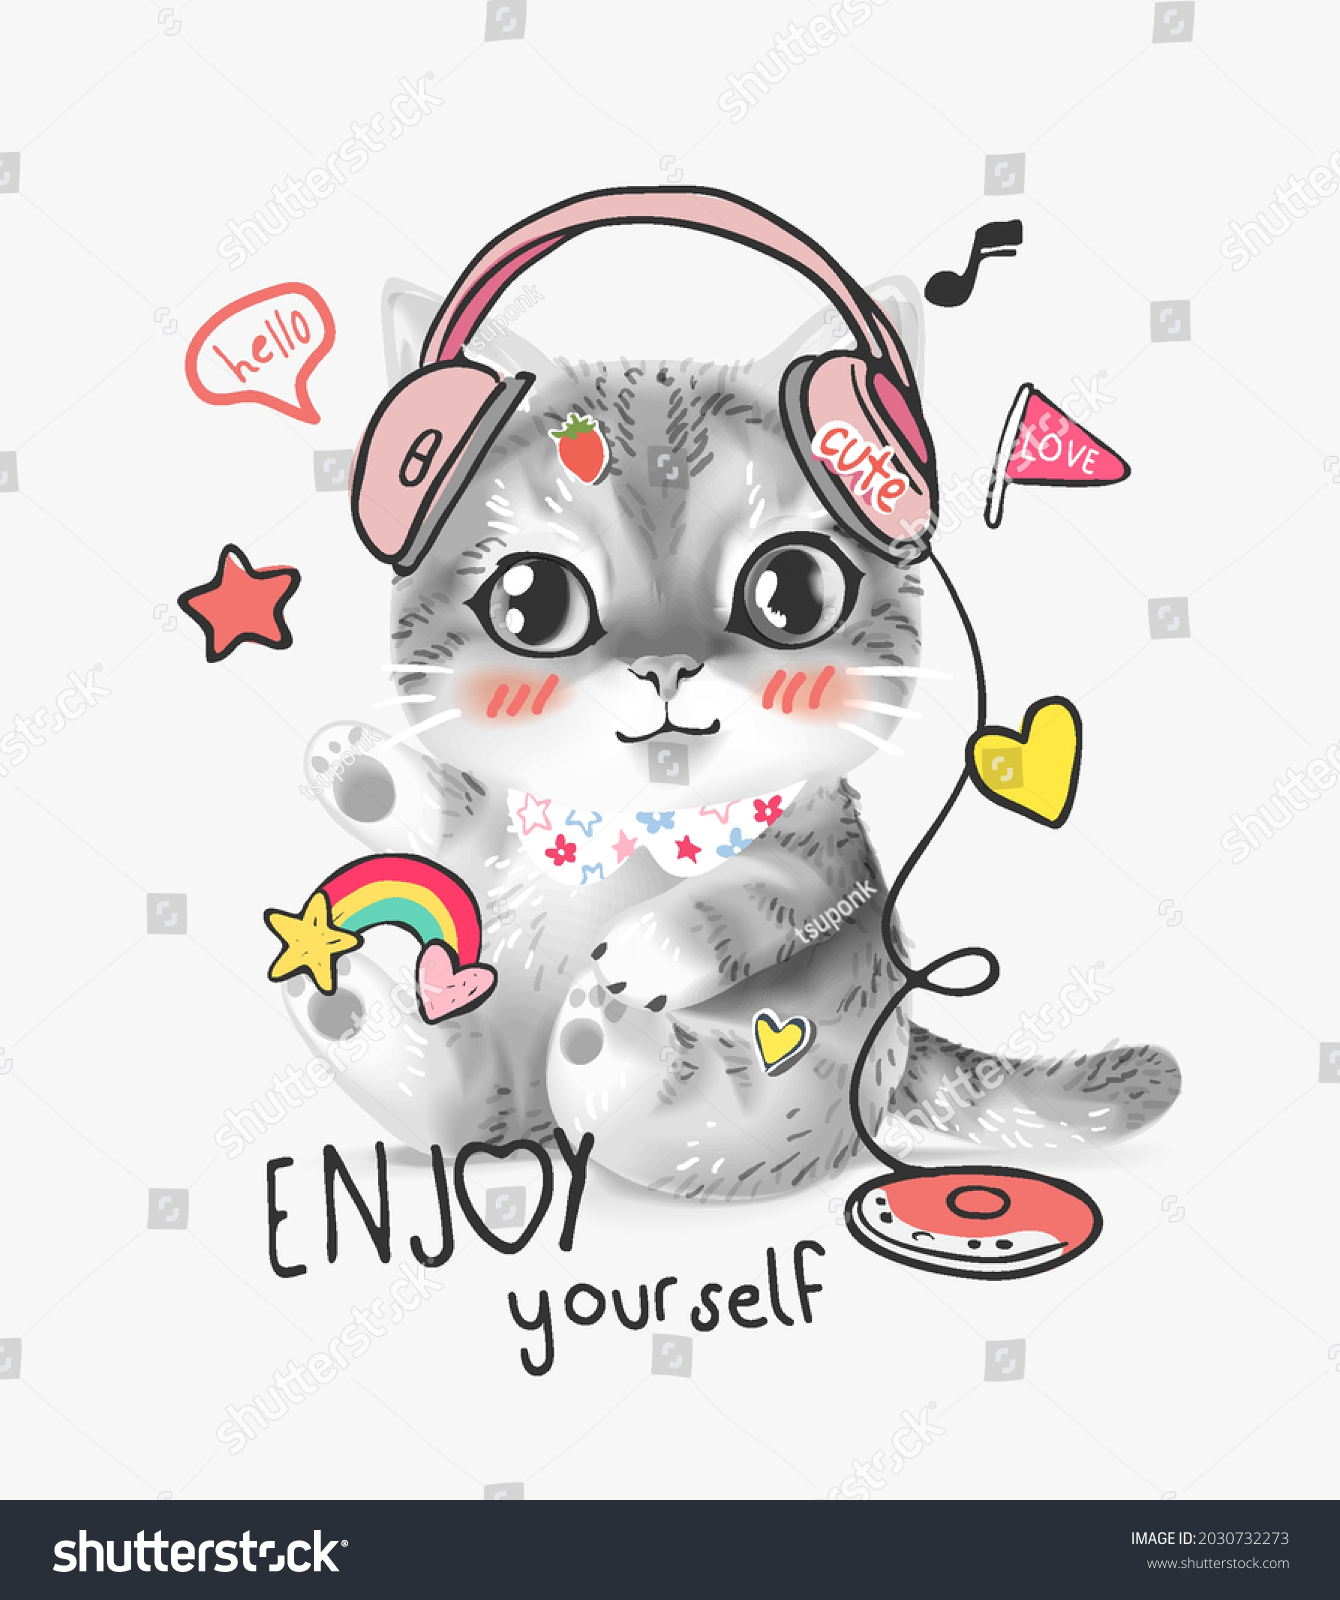 SVG of enjoy yourself slogan with cute kitten on headphone and colorful icons vector illustration svg